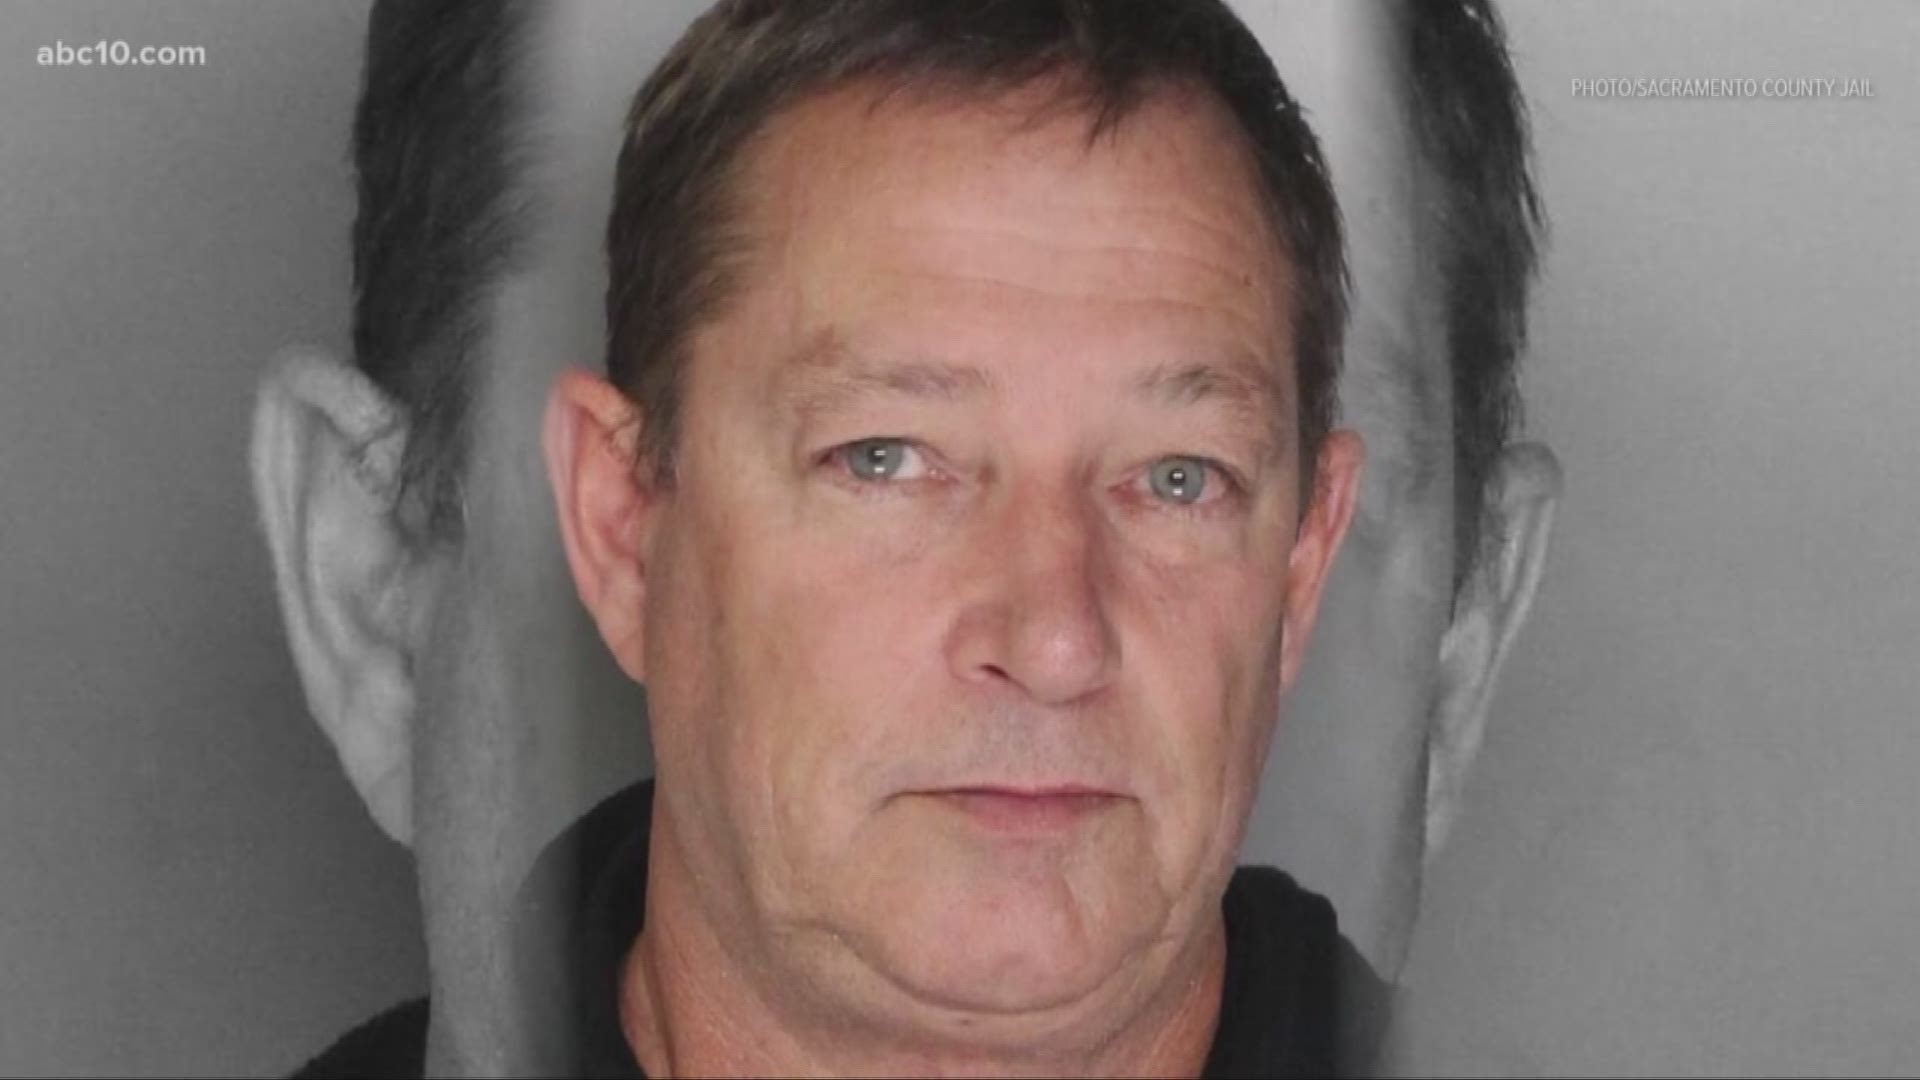 Authorities arrested 58-year-old Roy Charles Waller, of Benicia, in Berkeley on Thursday. The NorCal Rapist case has gone on for 27 years, with the earliest reported incident occurred in 1991.